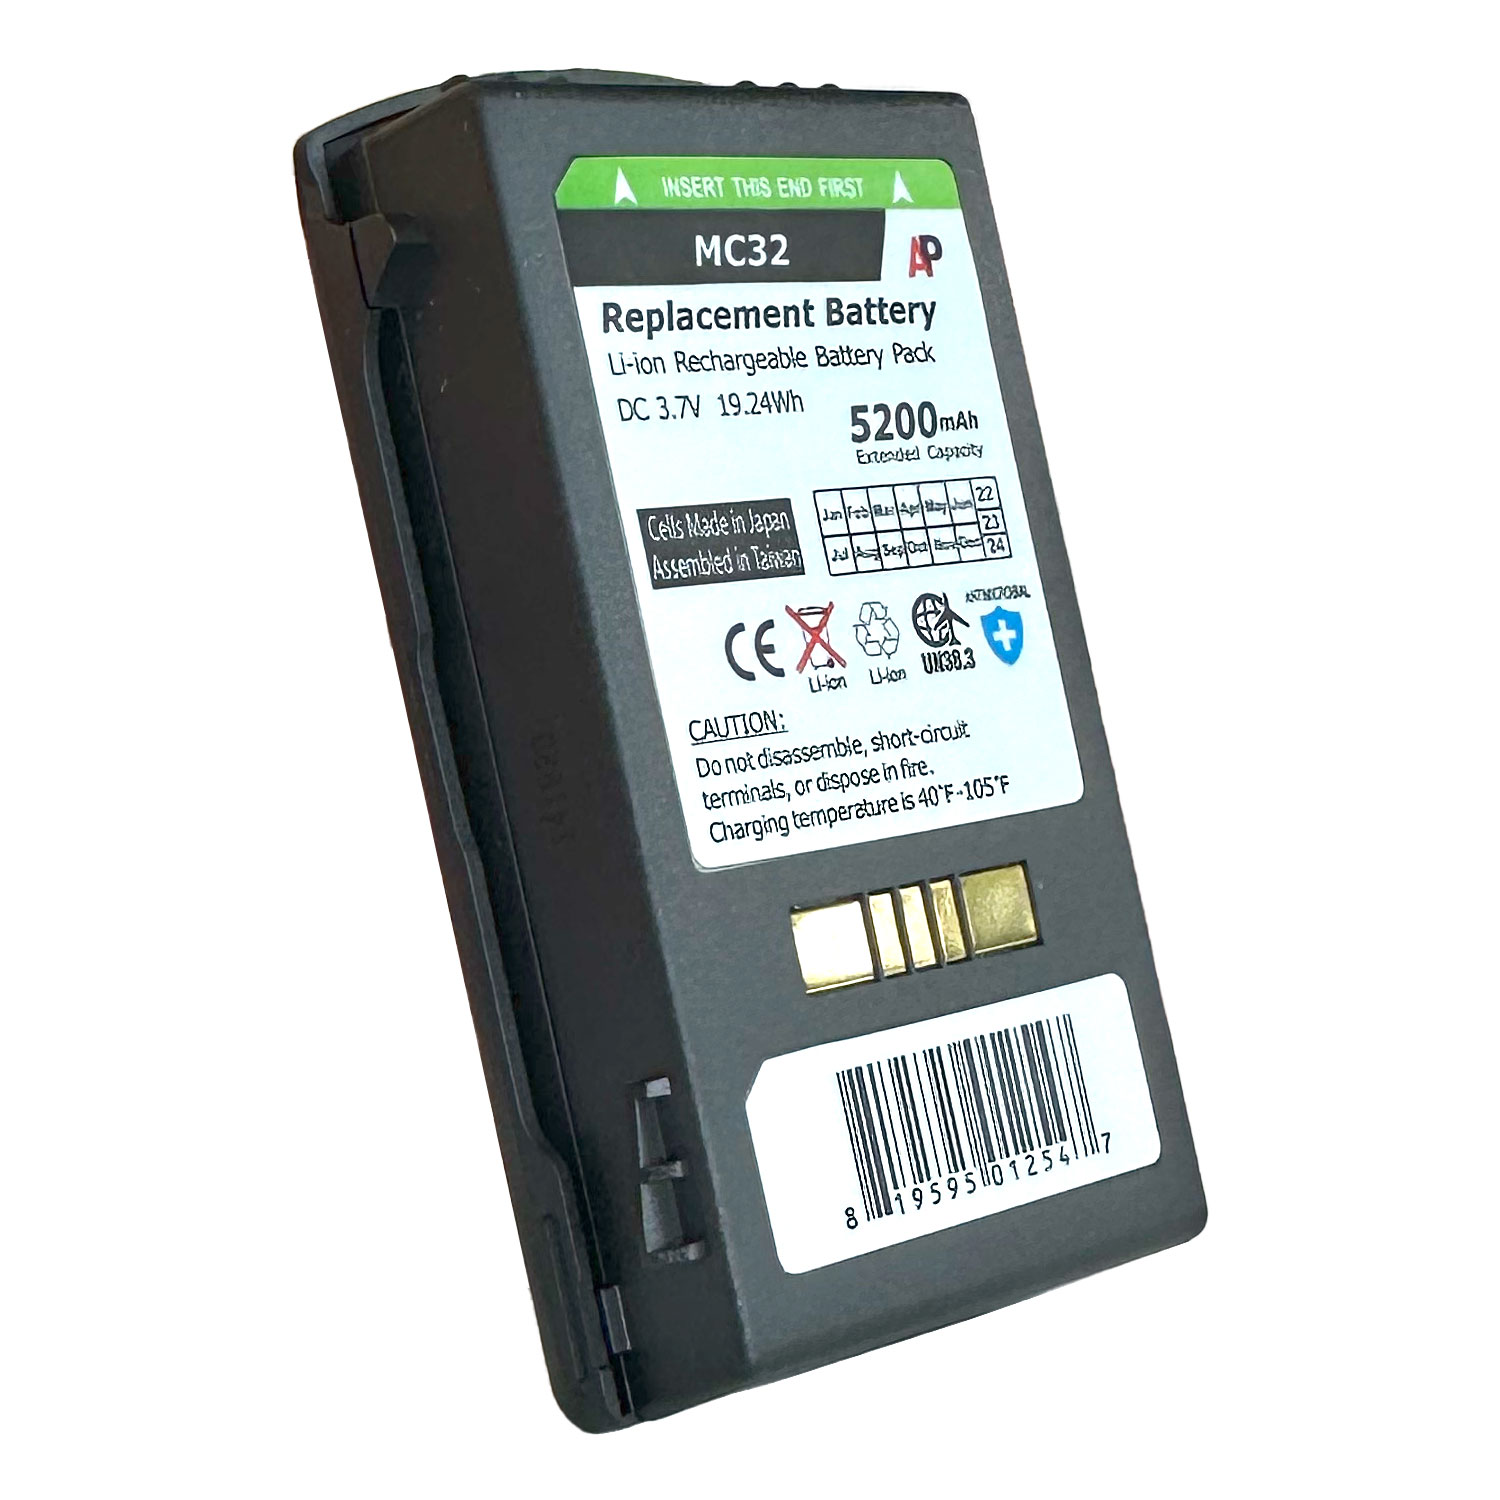 Extended Capacity Replacement Battery for Motorola MC3200 Scanner. 5200 mAh. - image 3 of 5